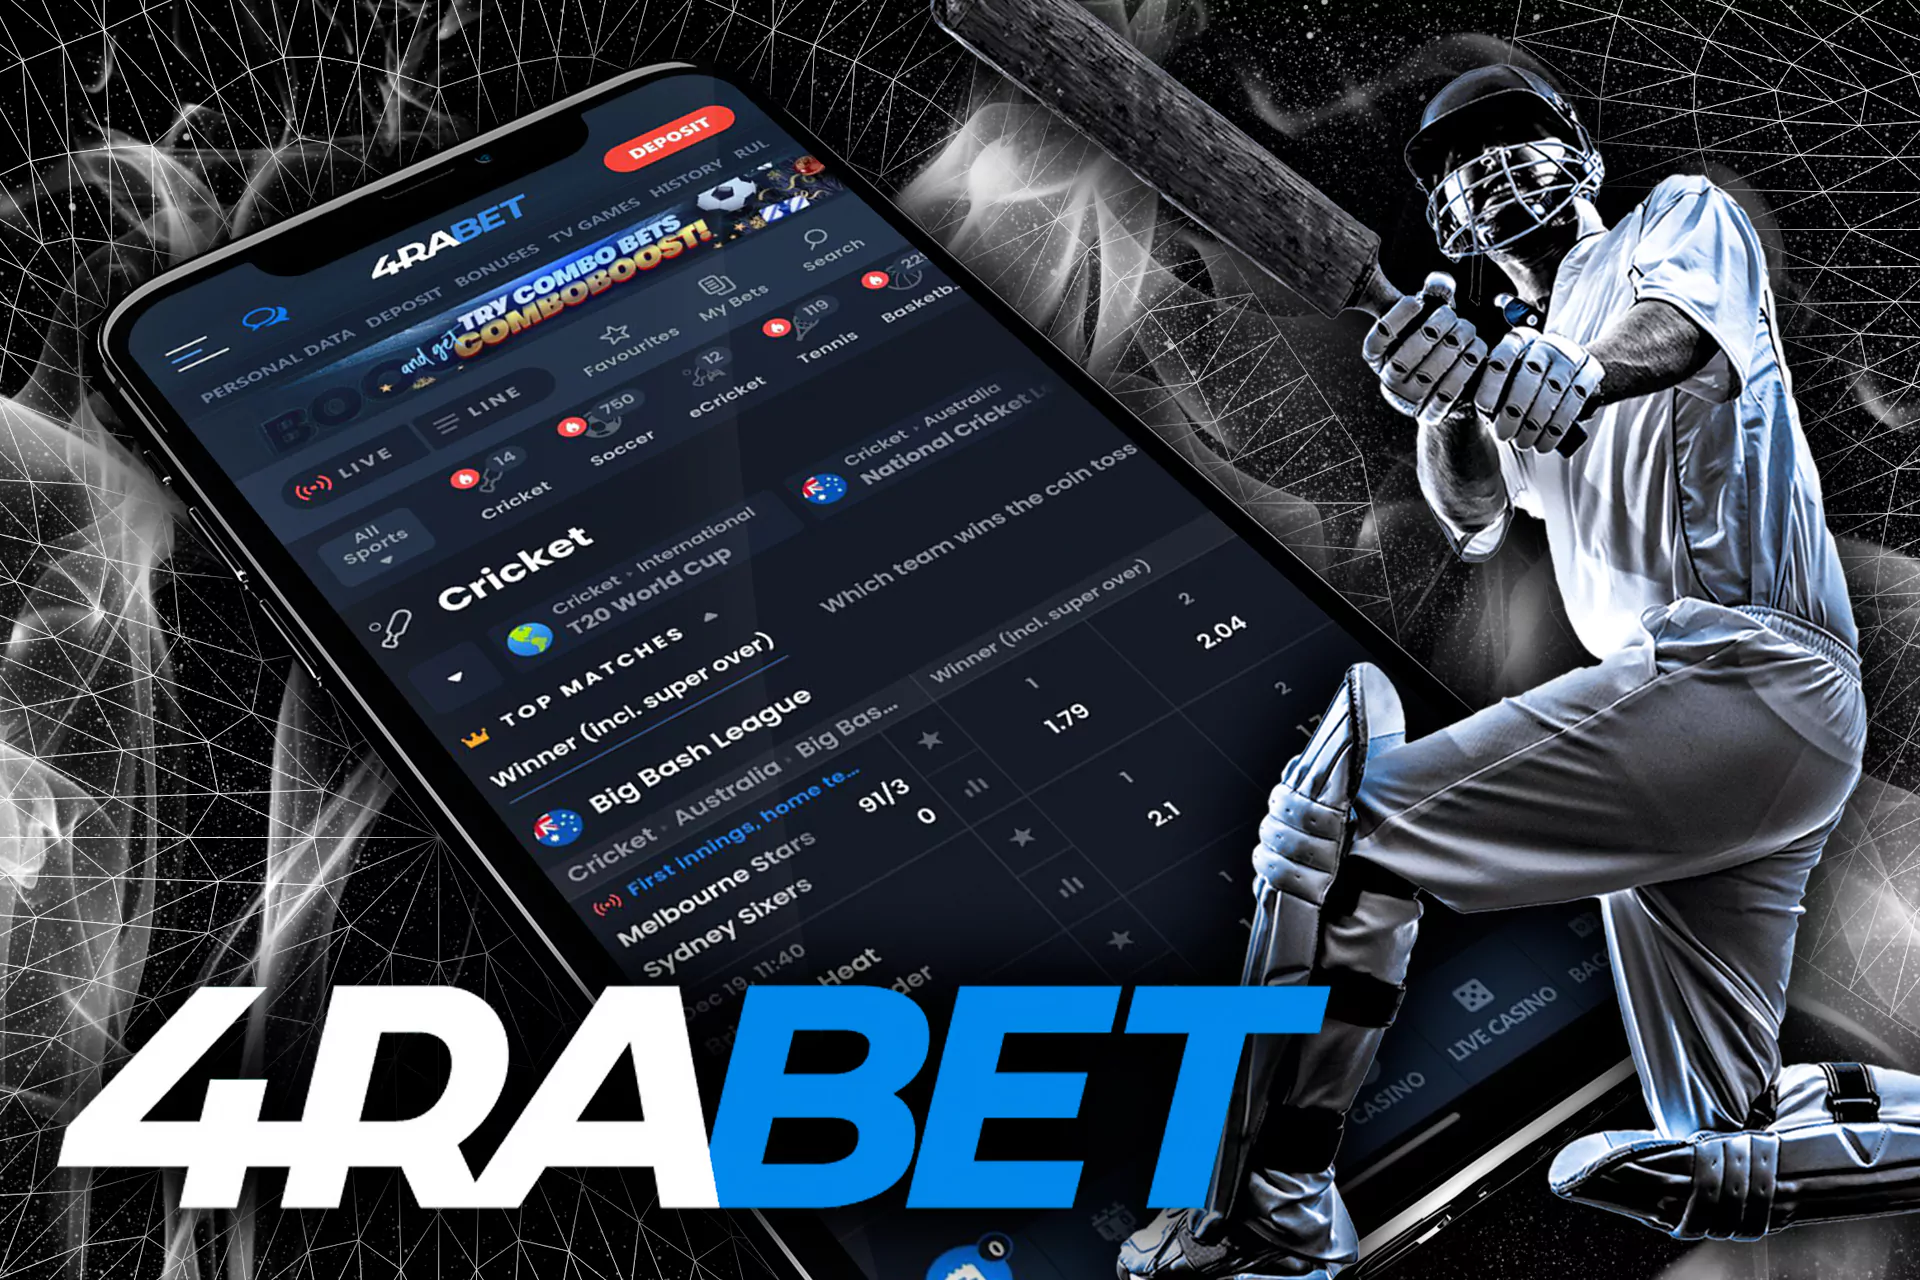 4rabet is a great app for cricket betting in the Indian region.